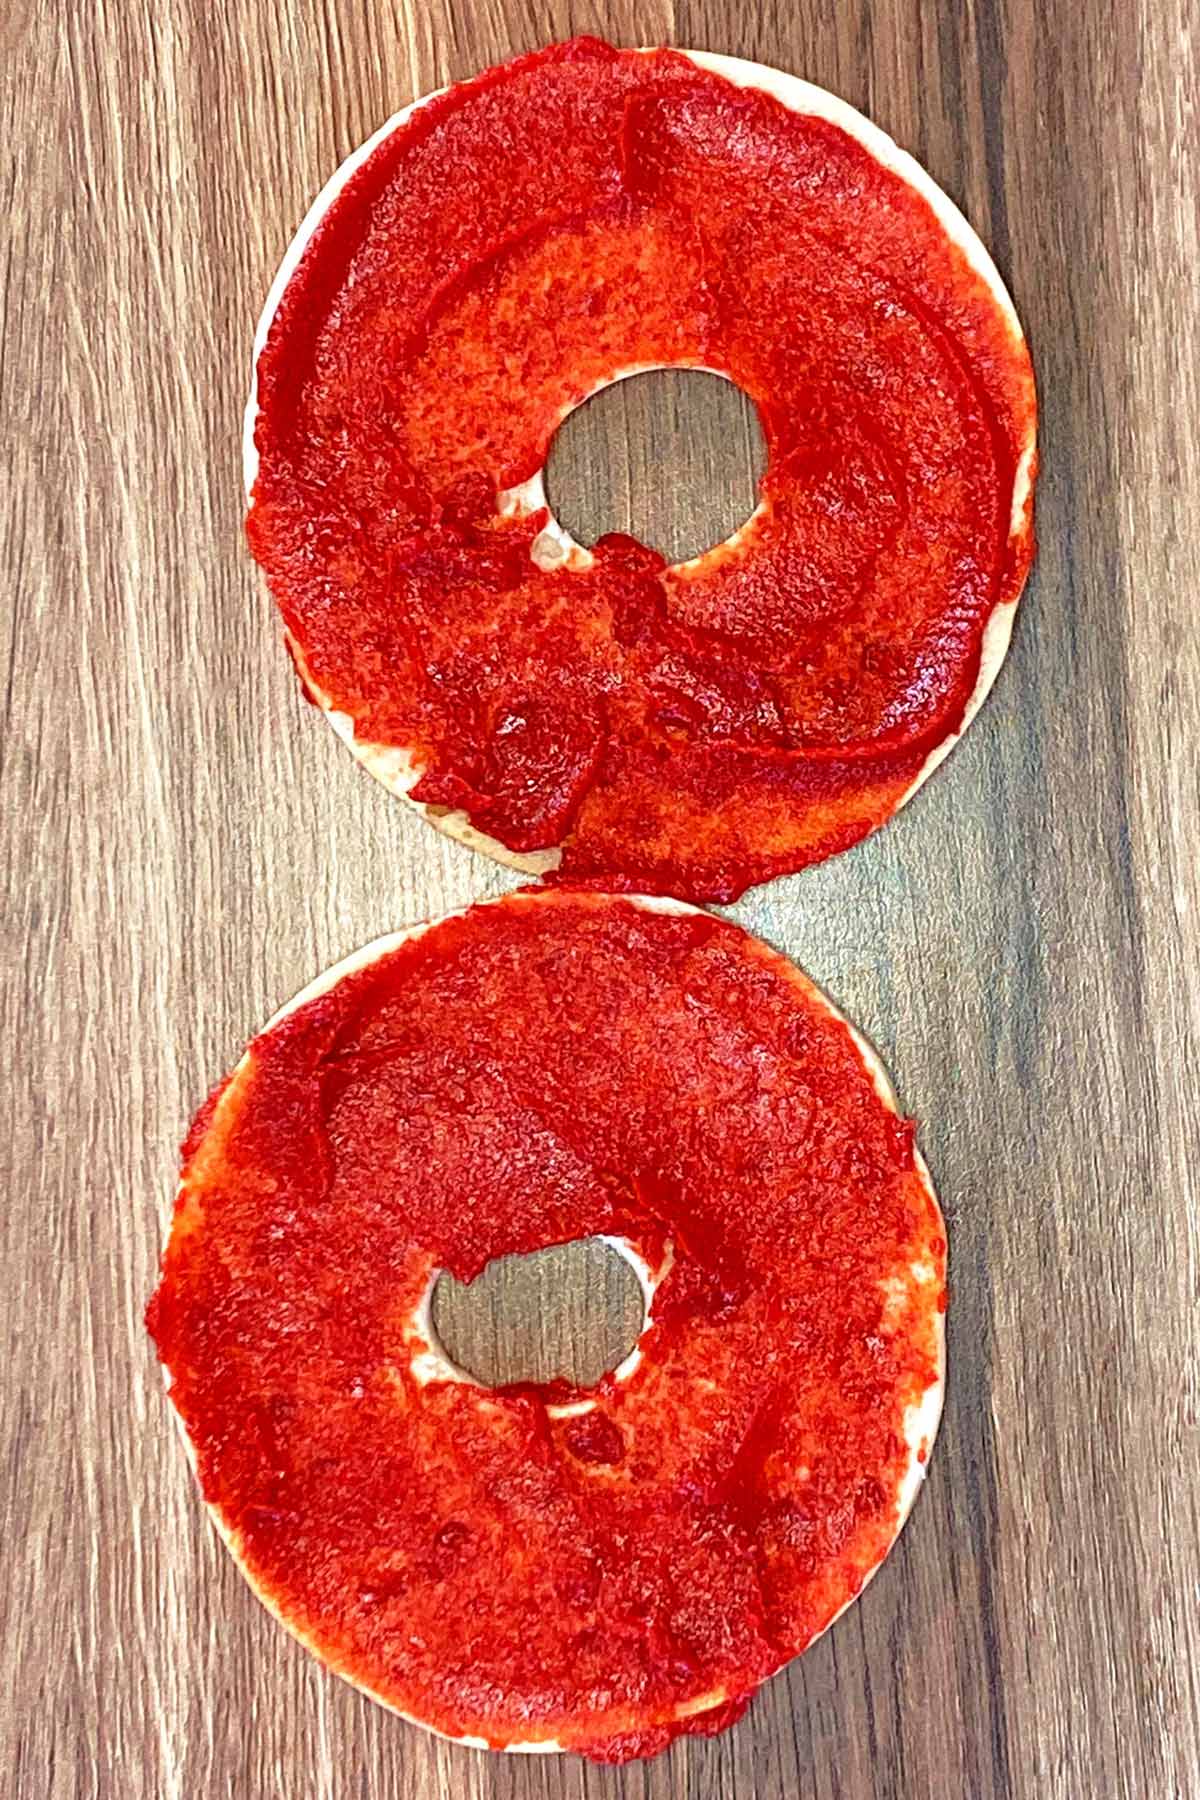 Two bagel halves with tomato puree spread on them.